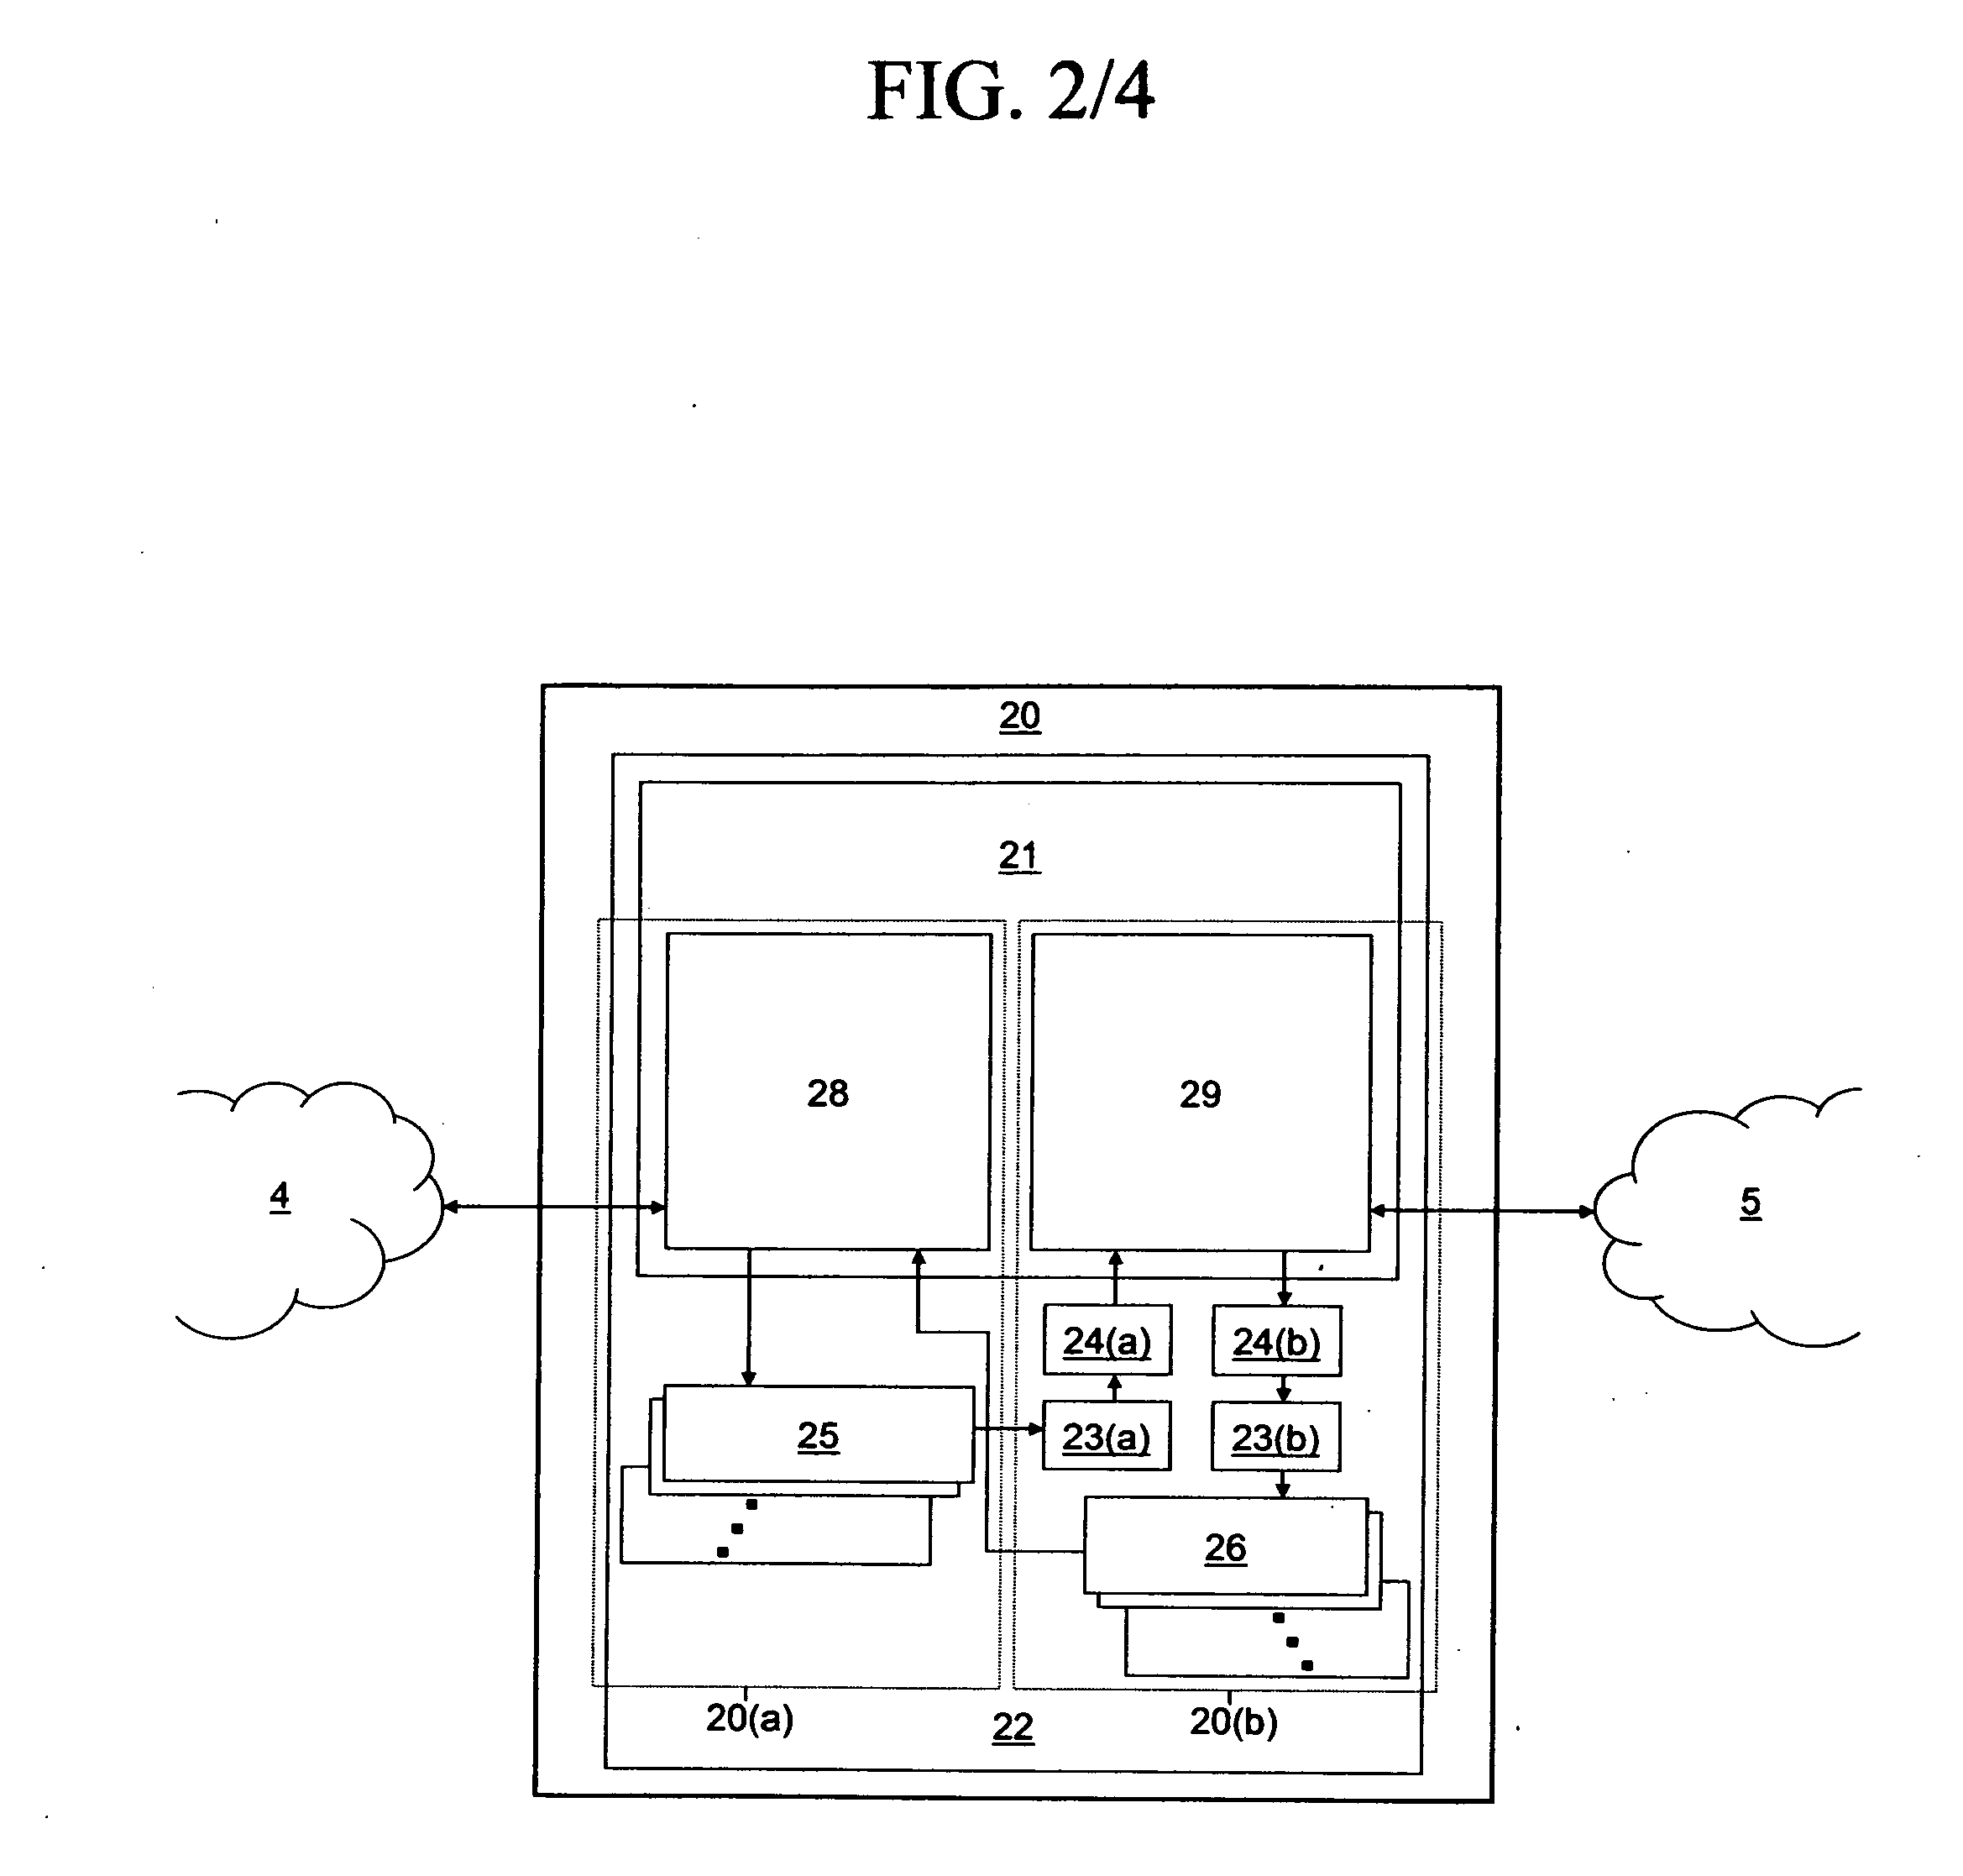 Automated, transparent and secure system and method for remotely managing network elements